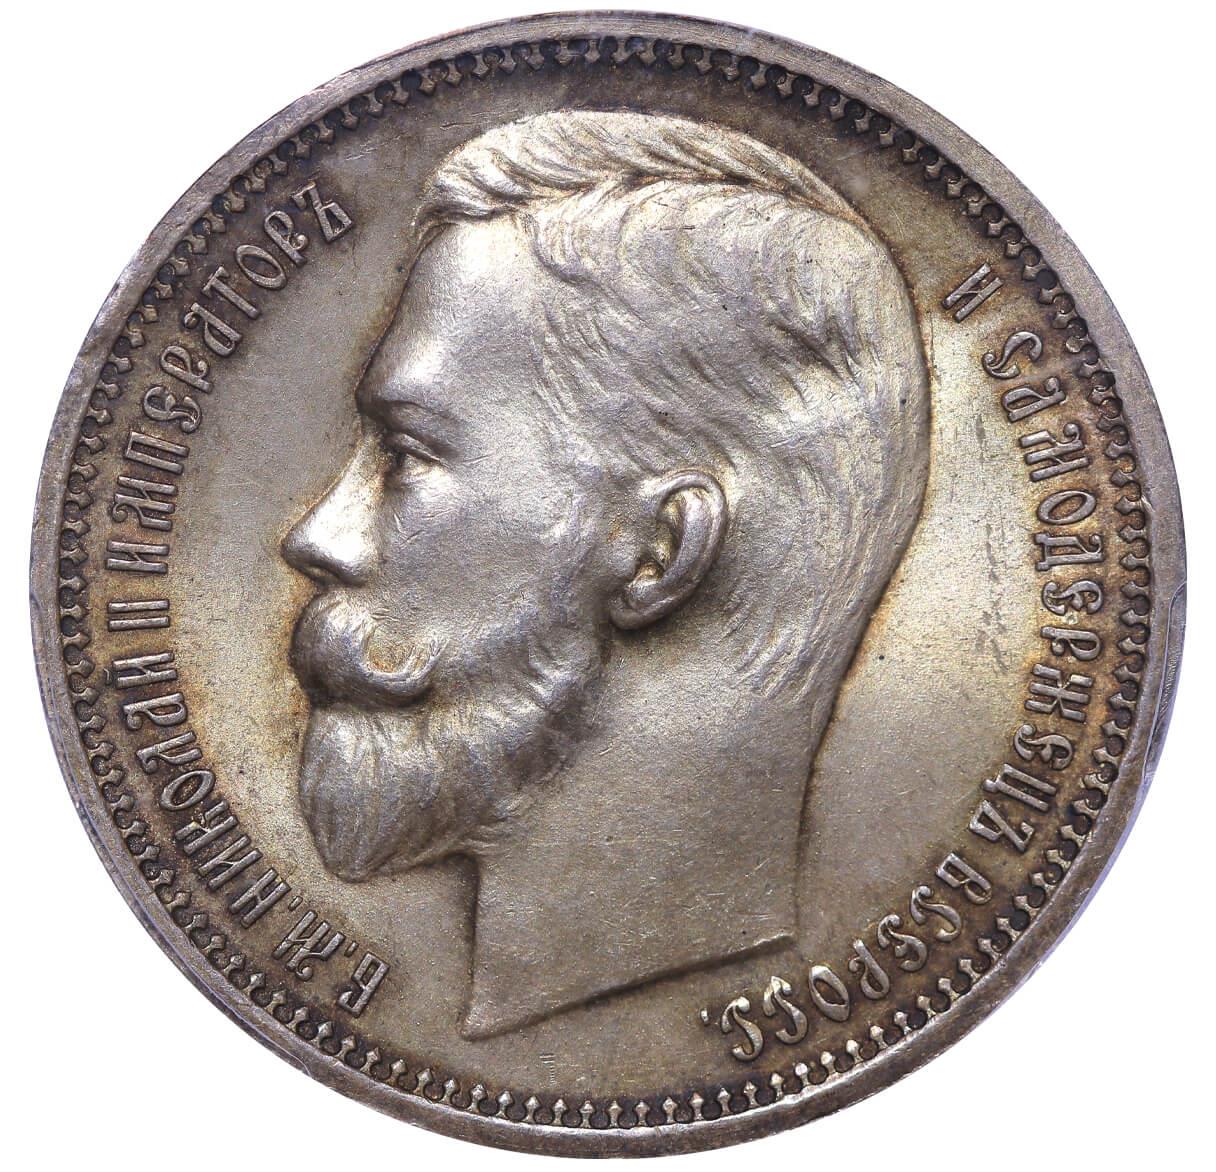 Russian Empire, 1 Rouble, 1912 year, (EB) - Image 2 of 3